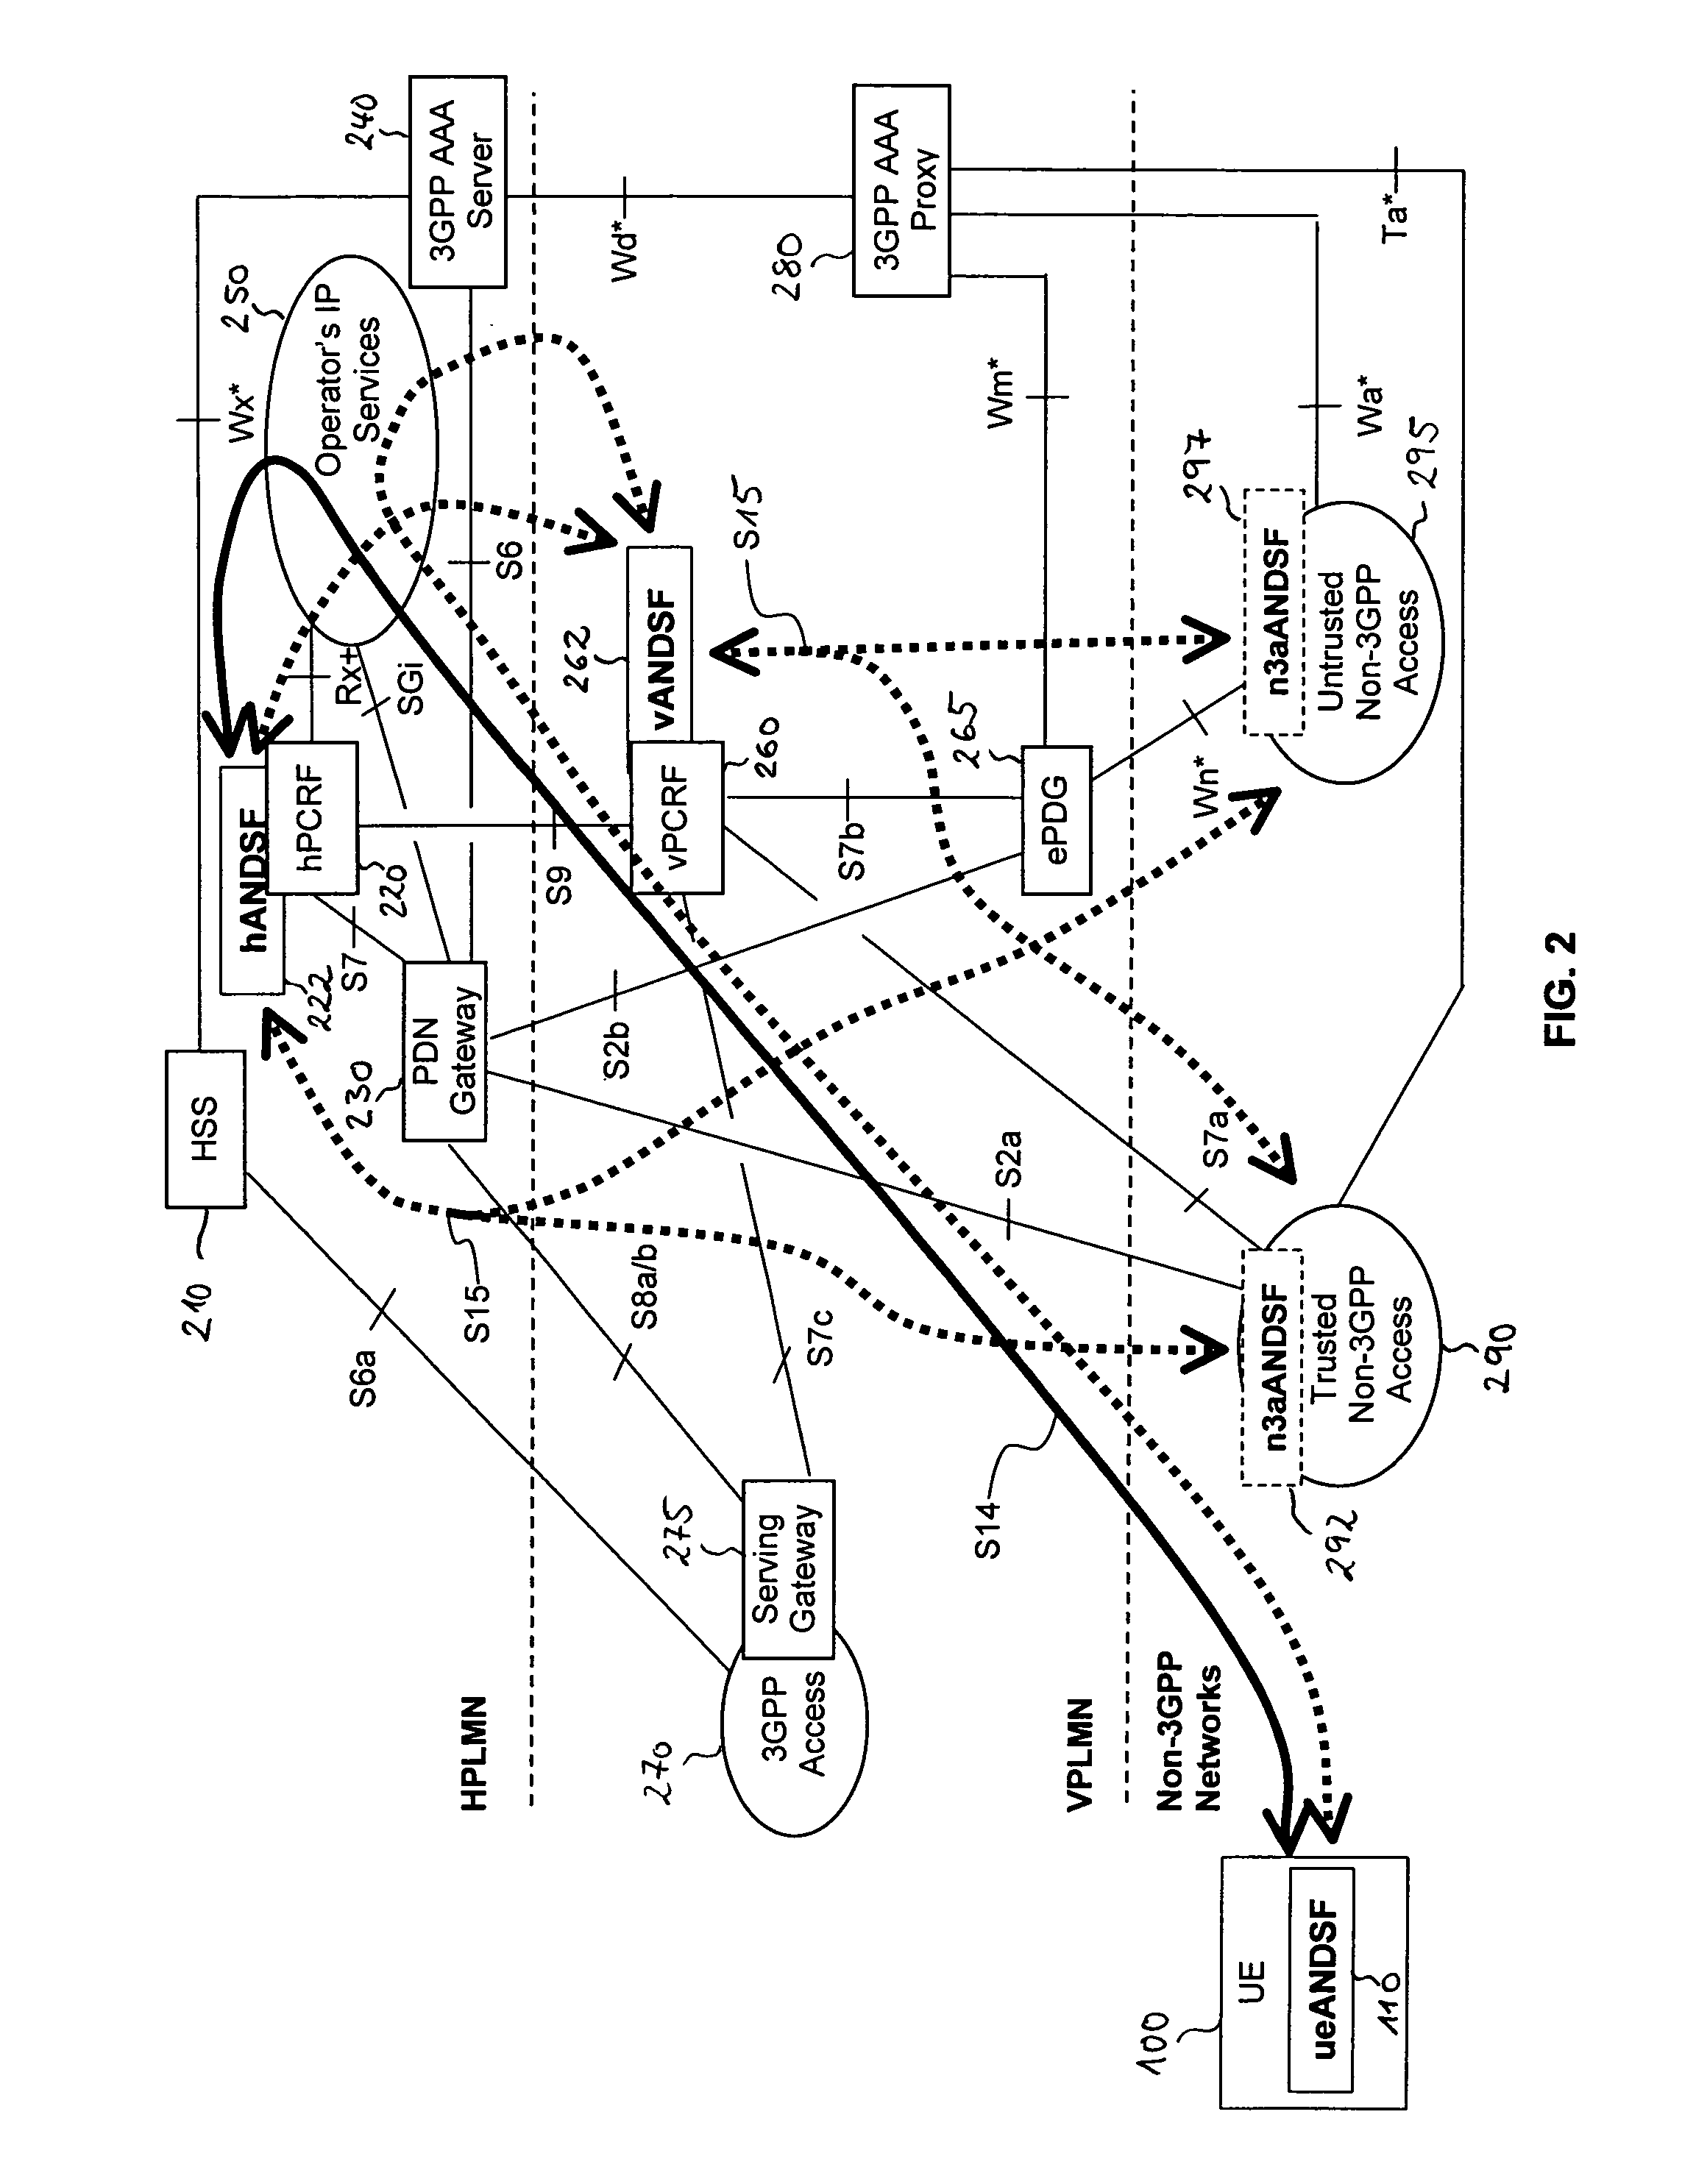 Access Network Selection in Multi-Access Network Environment